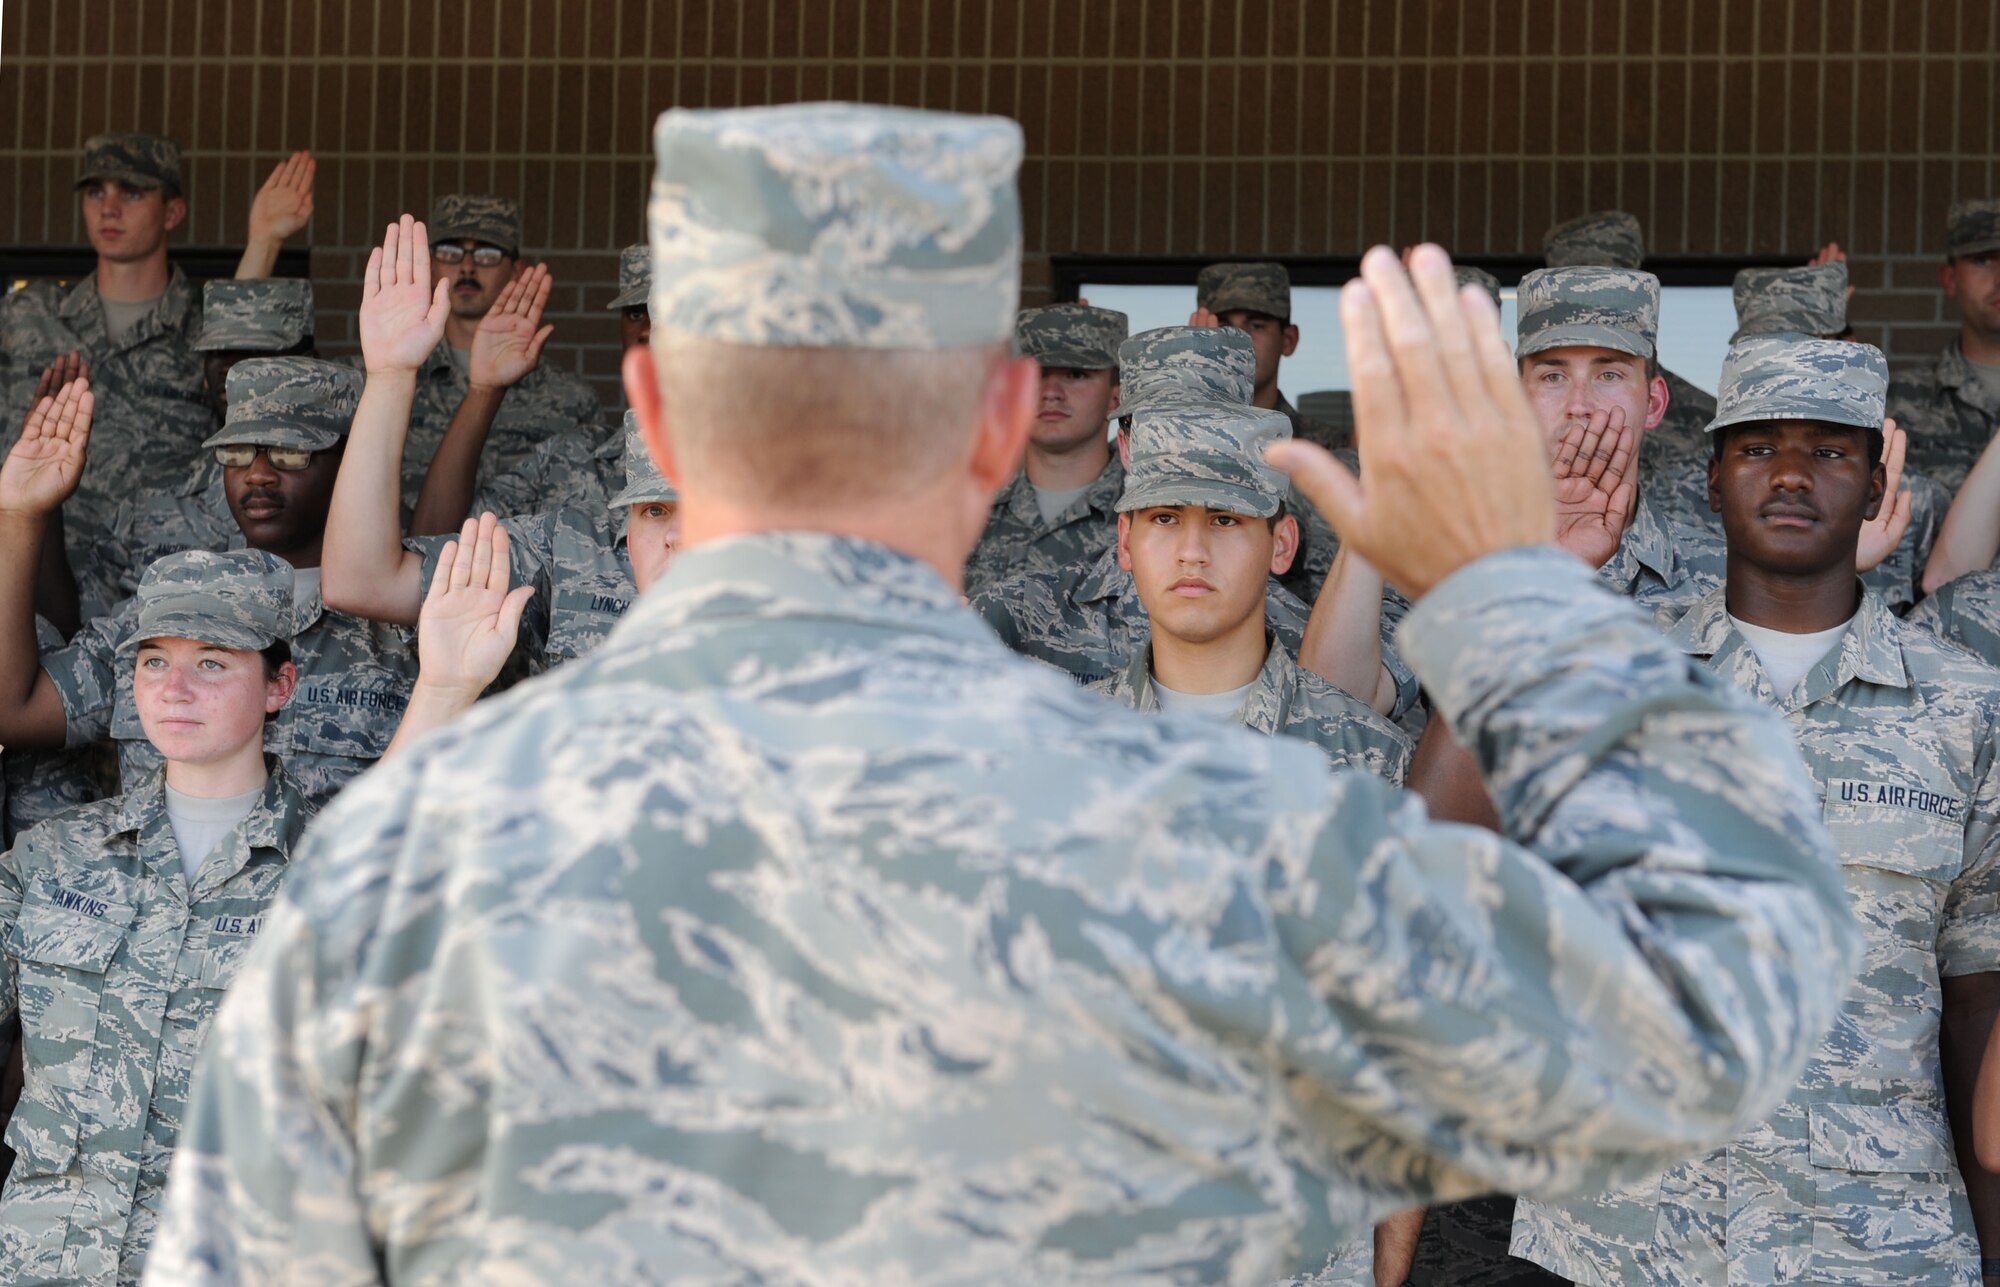 Col. Scott Solomon, 81st Training Group commander, administers the oath of enlistment to the Training Group’s 152 newest Airmen promotees during the 81st Training Group Dragon Recognition Ceremony on the drill pad at the Levitow Training Support Facility July 28, 2016, on Keesler Air Force Base, Miss. The monthly event also recognized the Airman of the Month for June, the 2016 second quarter Military Training Flight of the Month and Military Training Leader Dragon Award winner. (U.S. Air Force photo by Kemberly Groue/Released)